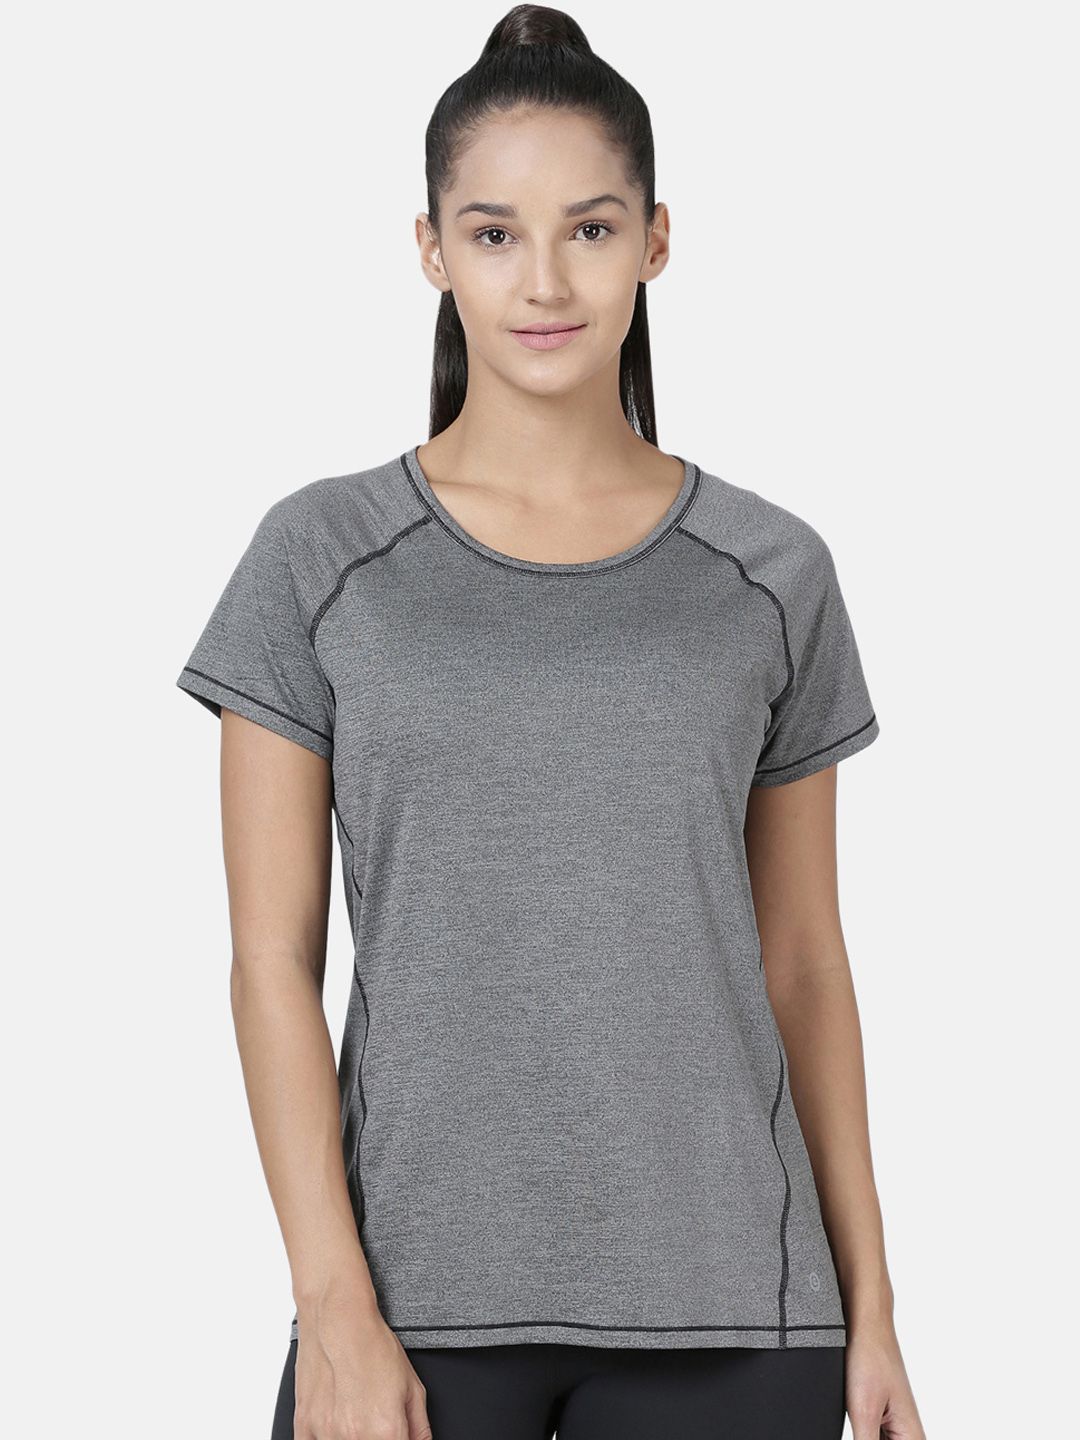 Enamor Women Grey Melange Relaxed Fit Athleisure Active T-Shirt Price in India